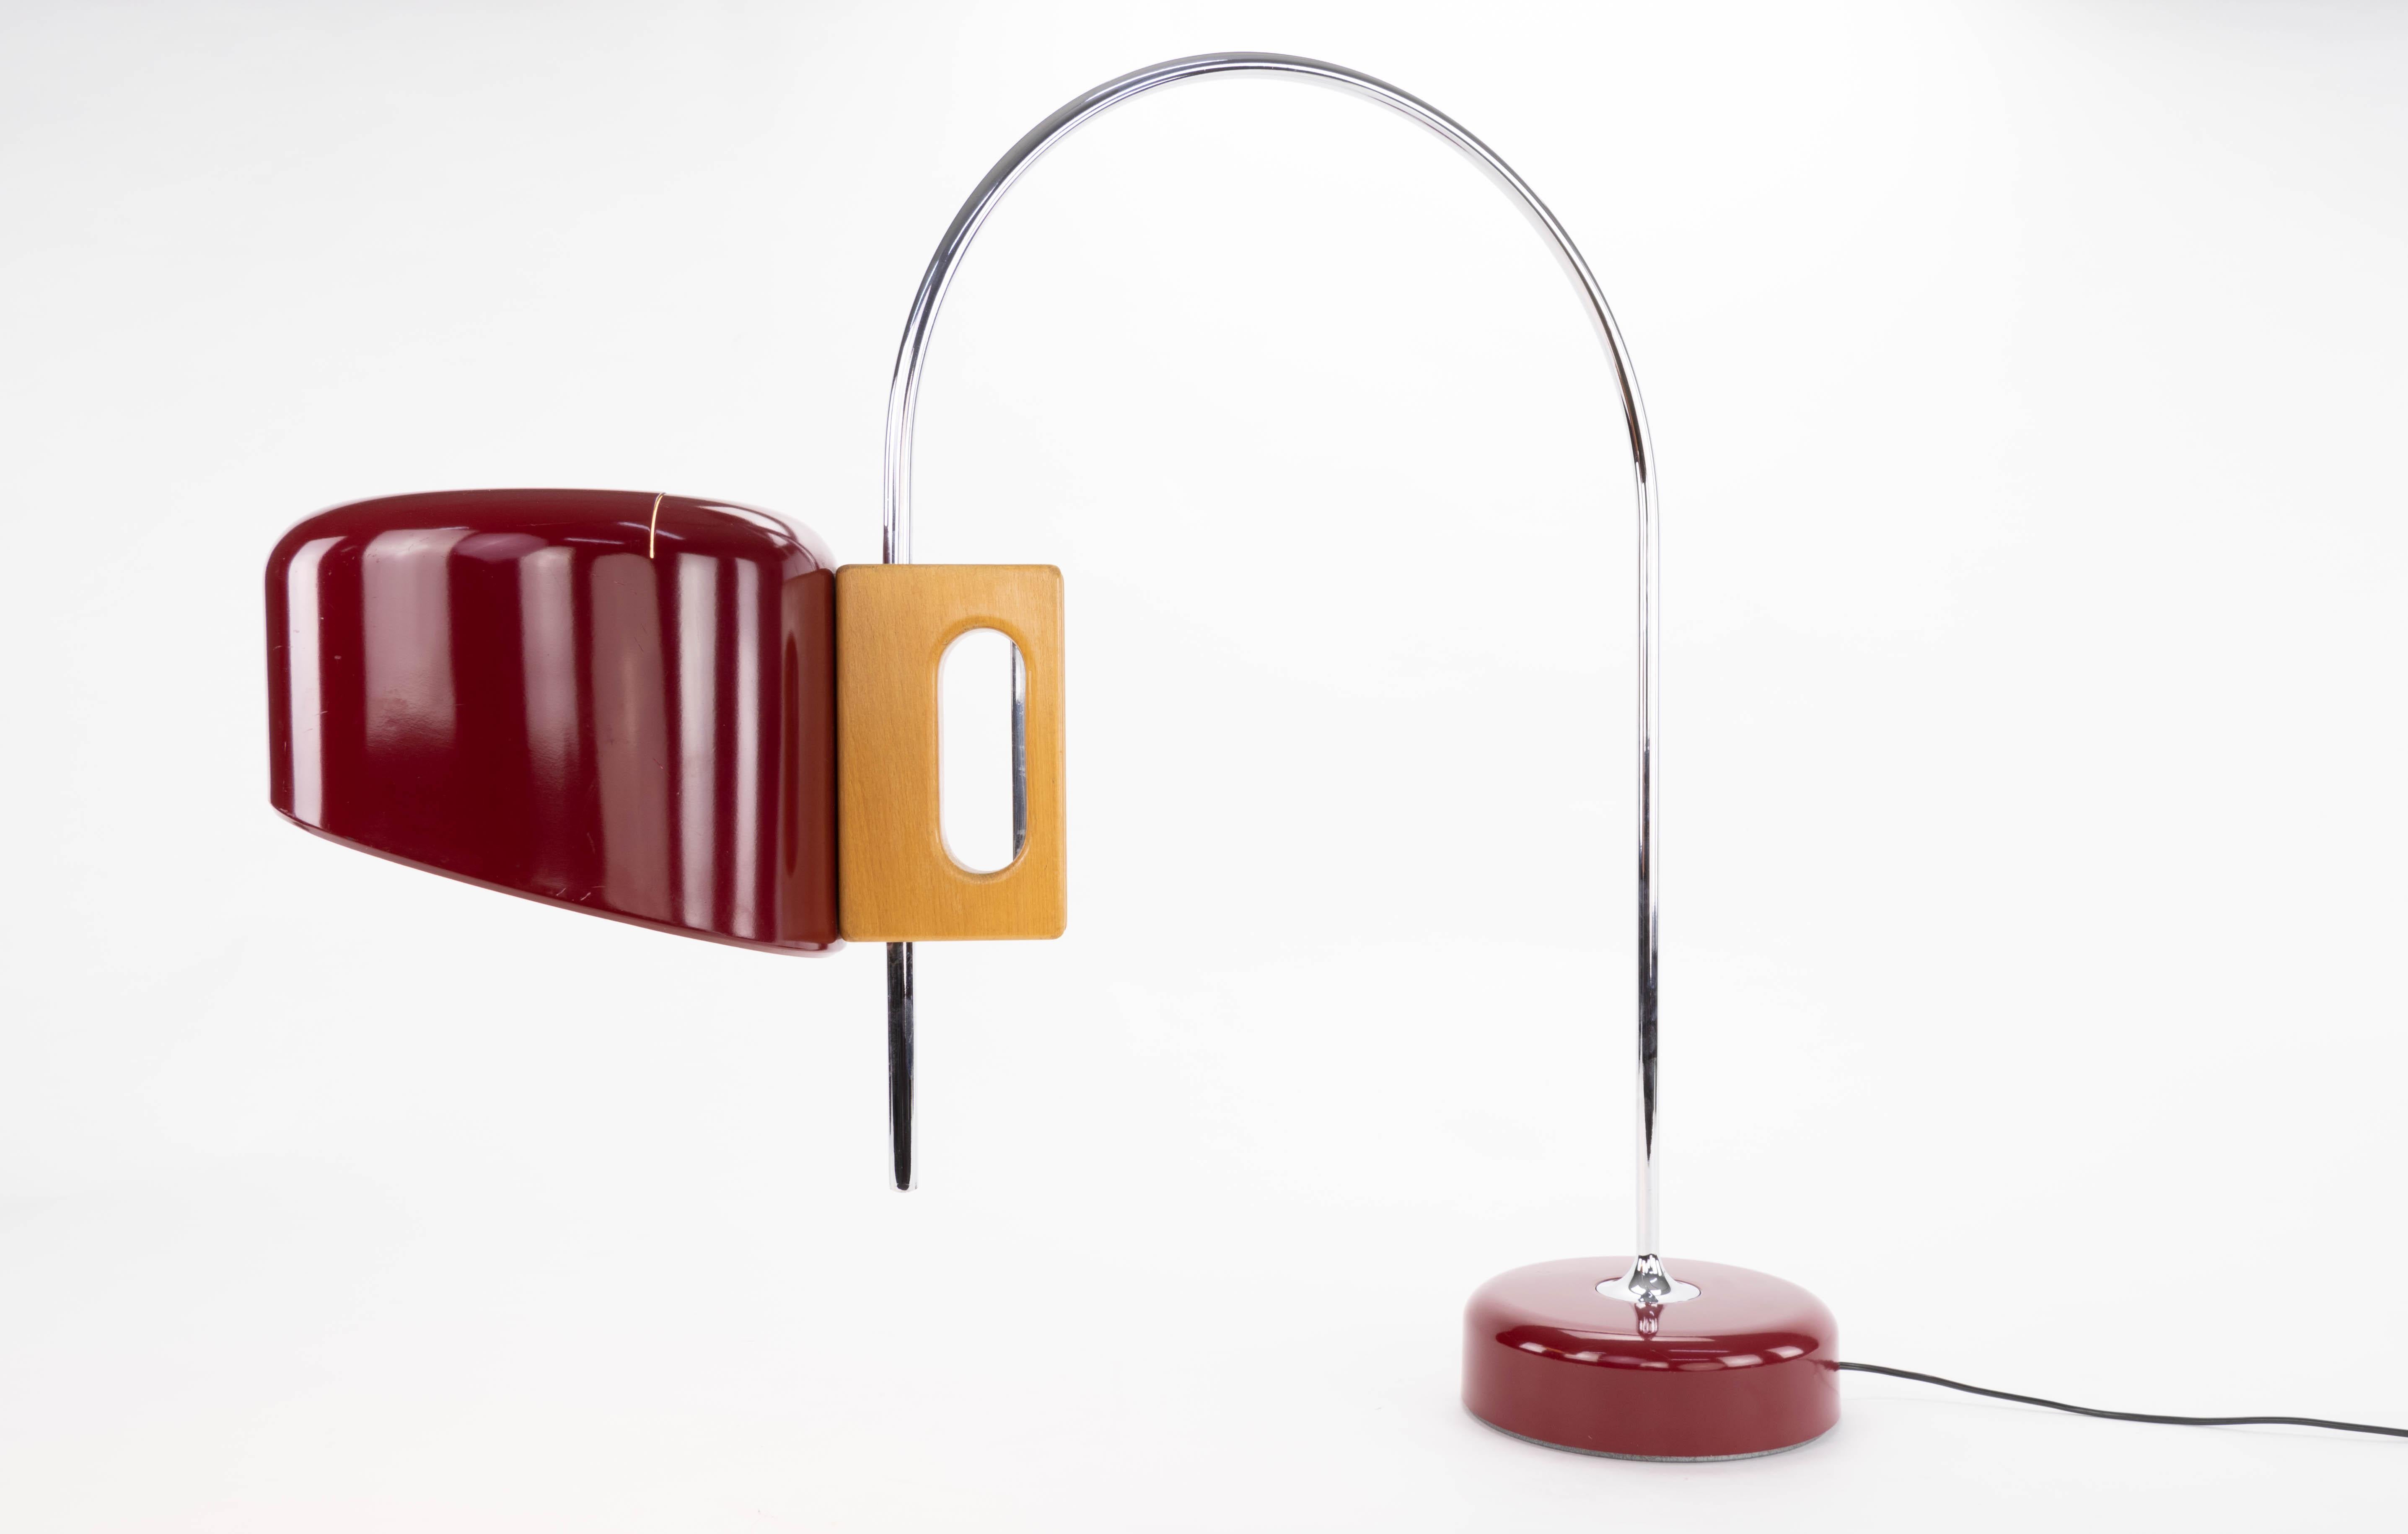 Sauce Mid-Century Modern Arc Table Lamp by Face Spain 1960 In Good Condition In Escalona, Toledo